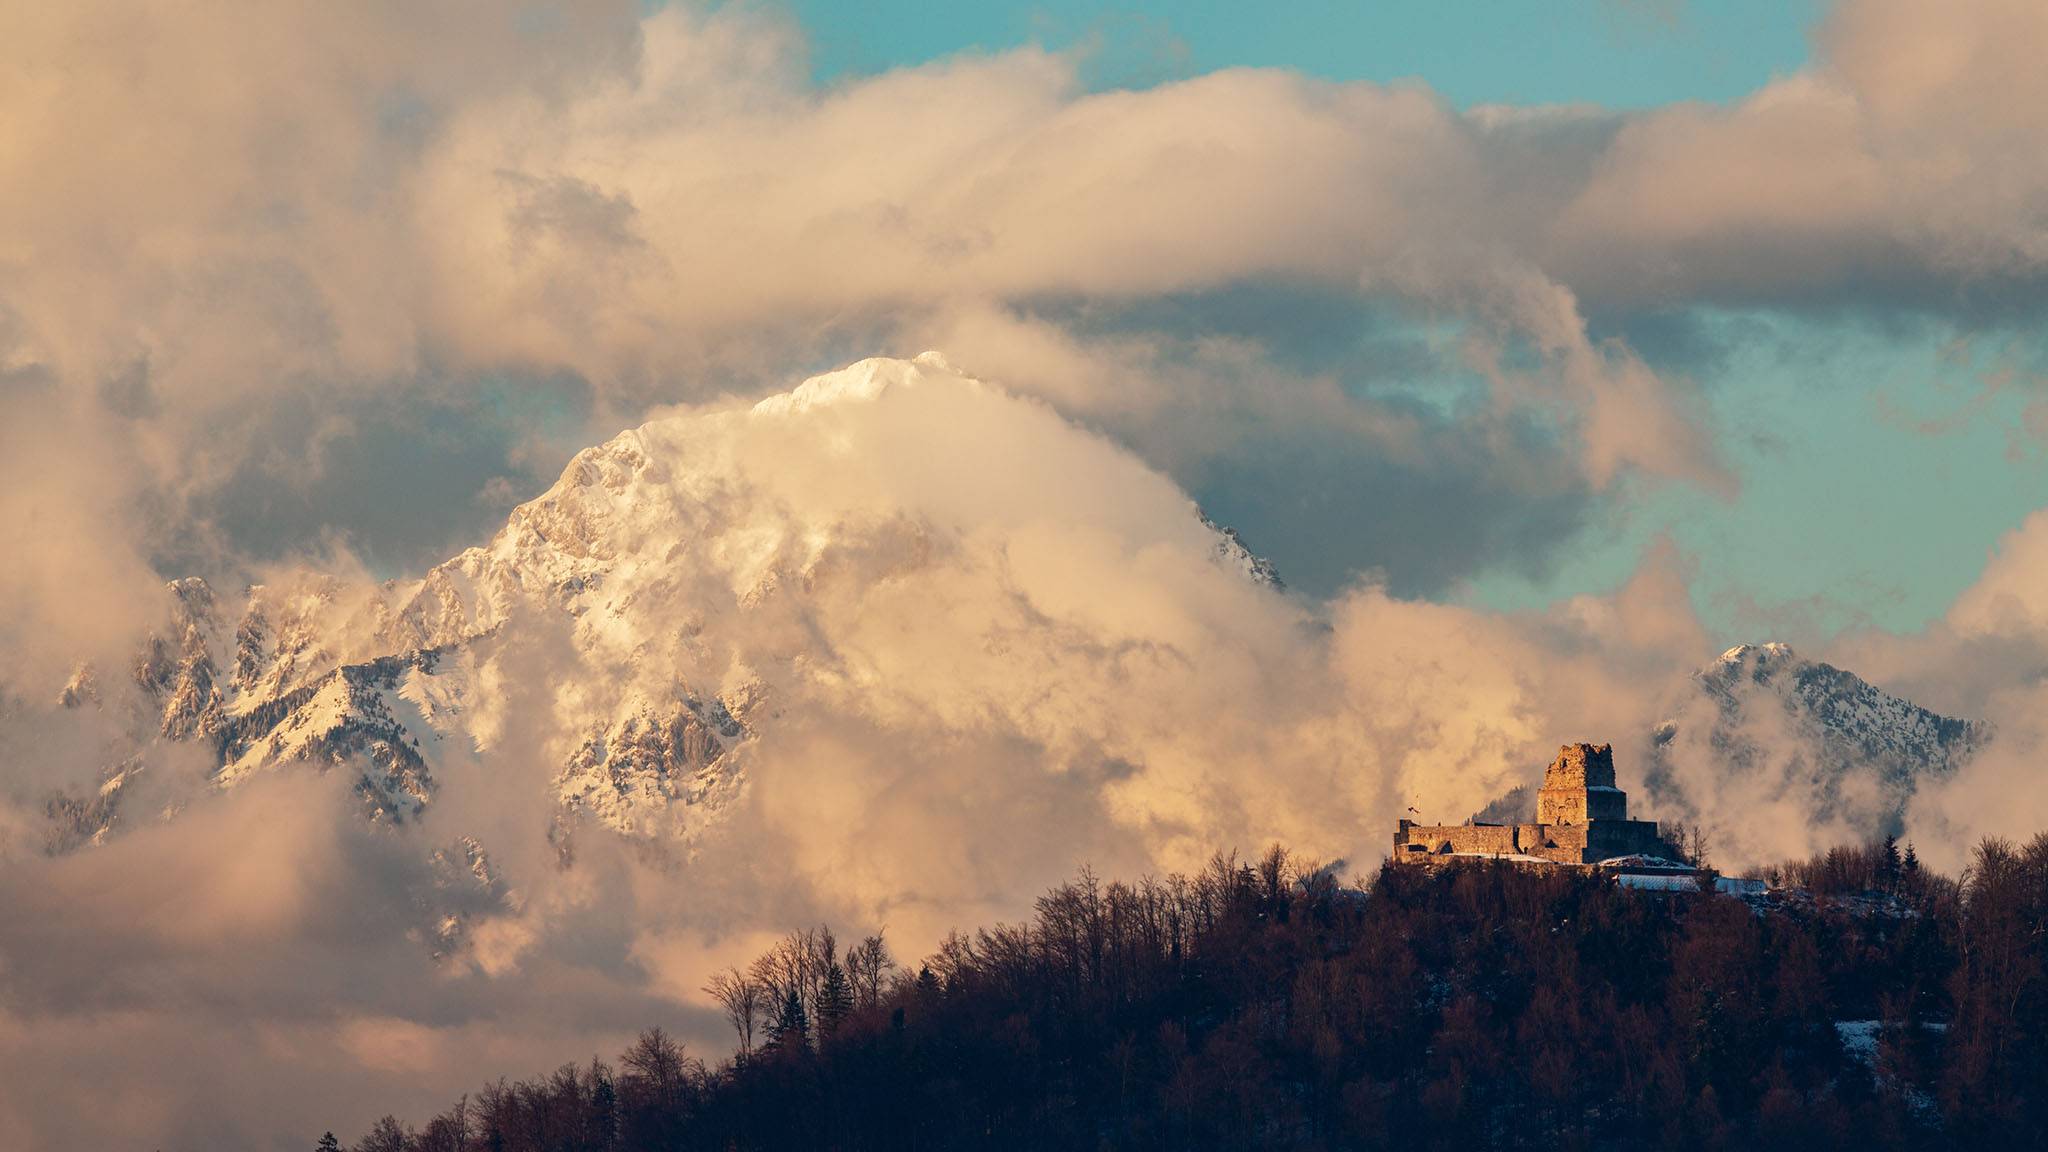 View of the ruins of Smlednik Castle with Storzic mountain, part of the Kamnik Alps, behind, Slovenia.